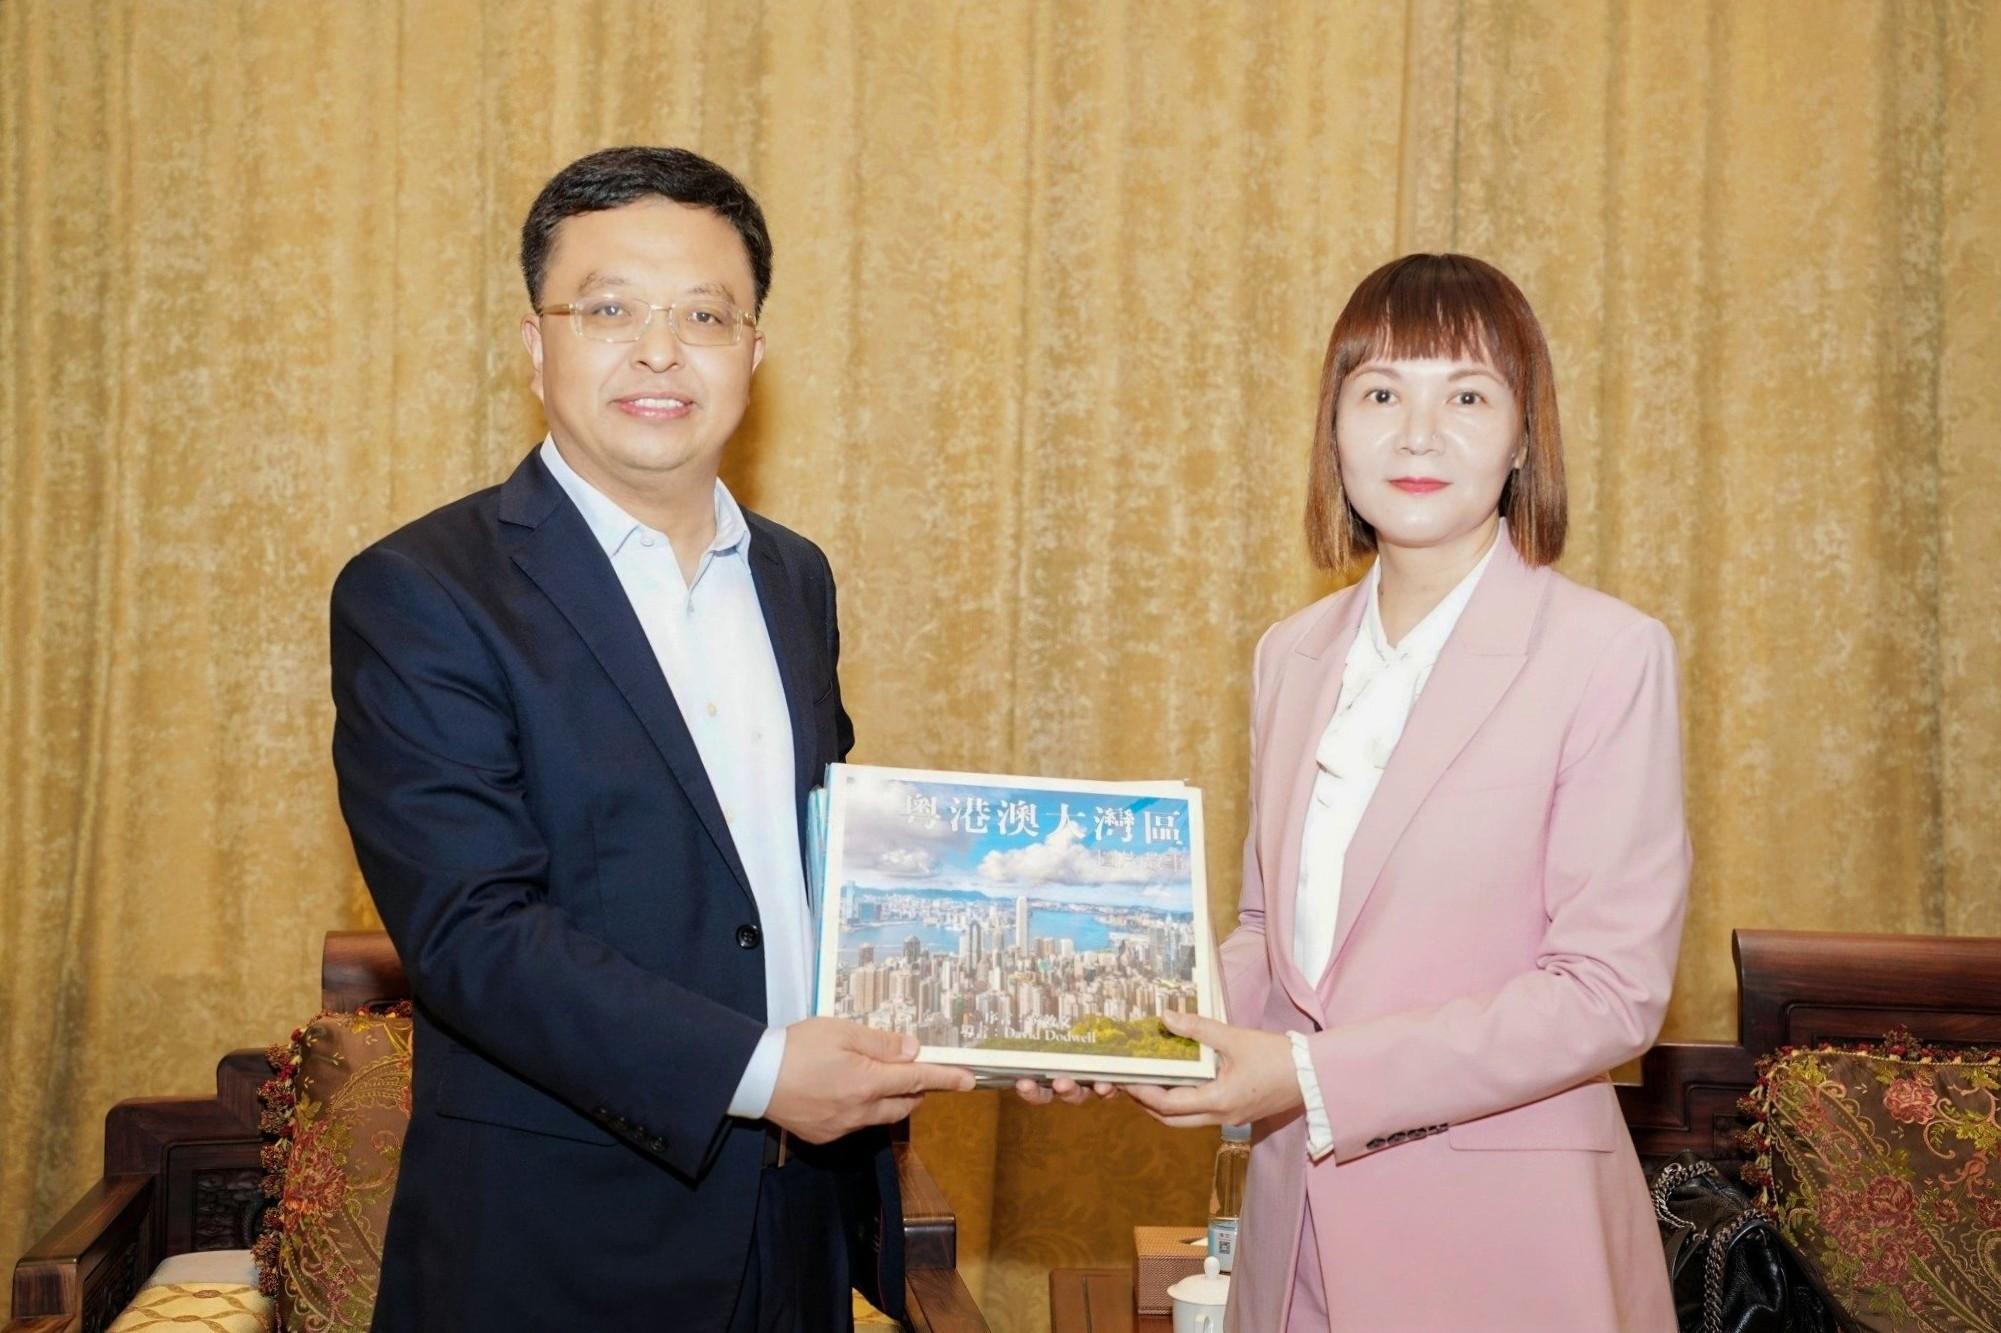 The Commissioner for the Development of the Guangdong-Hong Kong-Macao Greater Bay Area, Ms Maisie Chan (right), meets with member of the Standing Committee of the Communist Party of China Zhongshan Municipal Committee and Vice Mayor of Zhongshan, Mr Ye Hongguang (left), during her visit to Zhongshan today (June 3).  